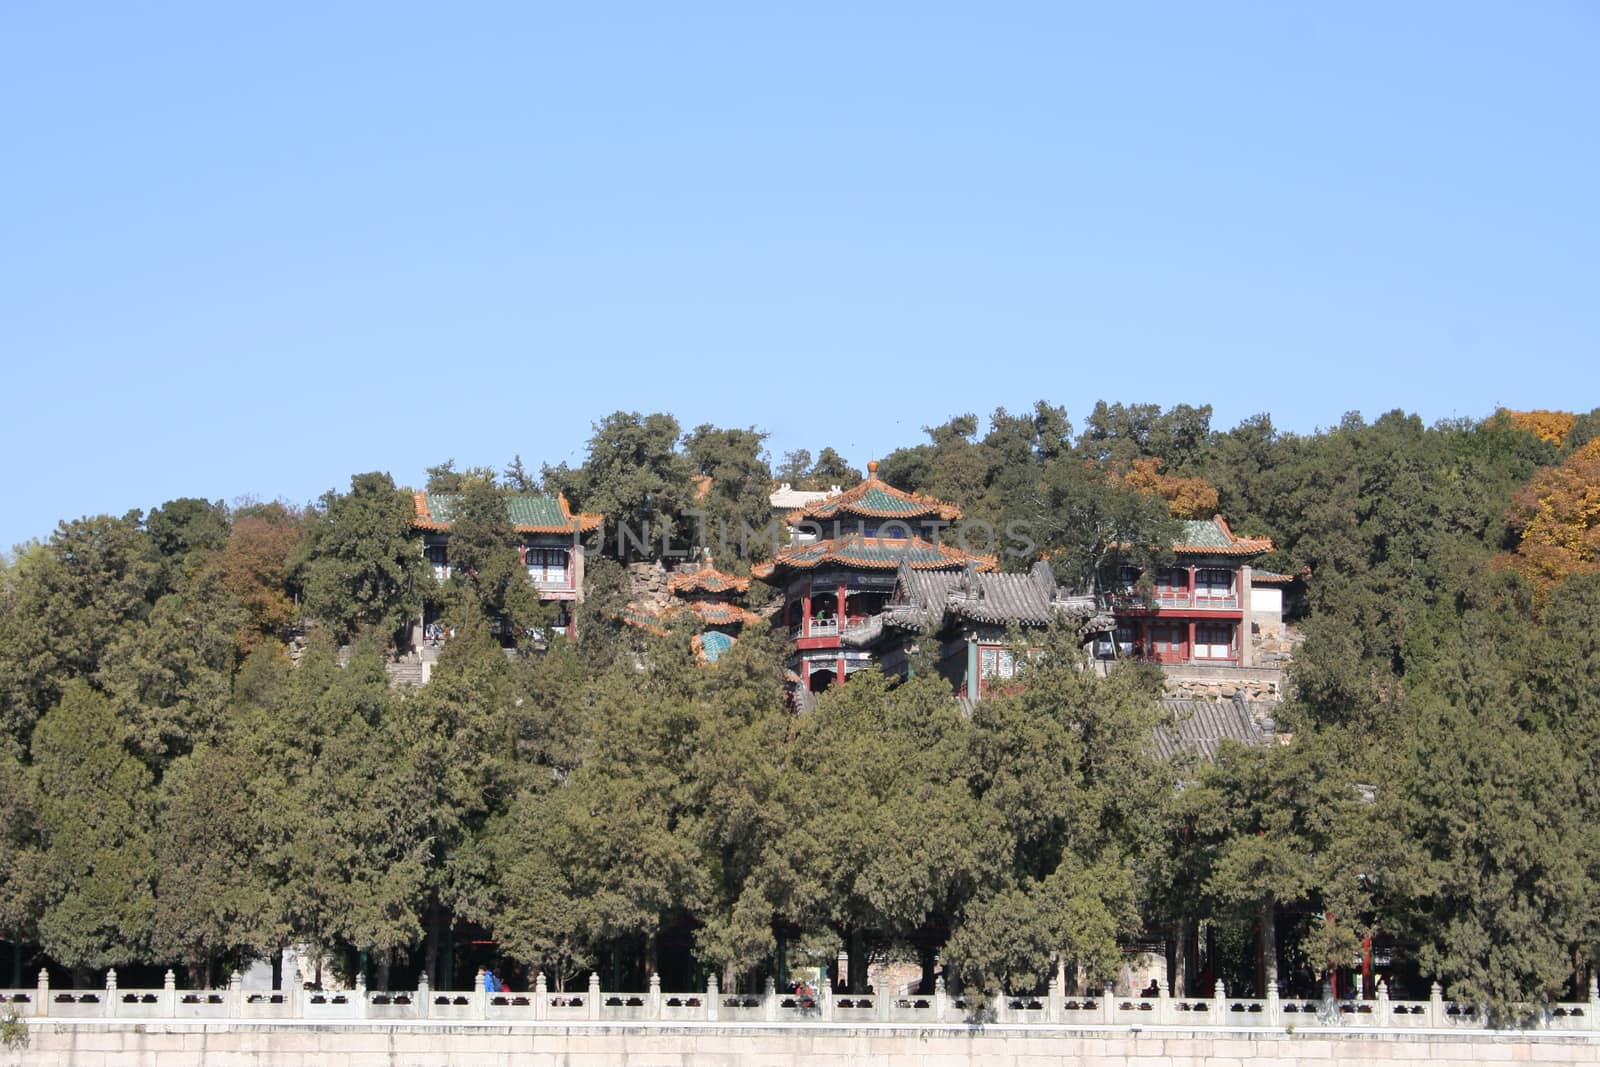 Beijing, China - November 1, 2016, Tower of the Fragrance of the Buddha (Foxiang Ge) in Summer Palace